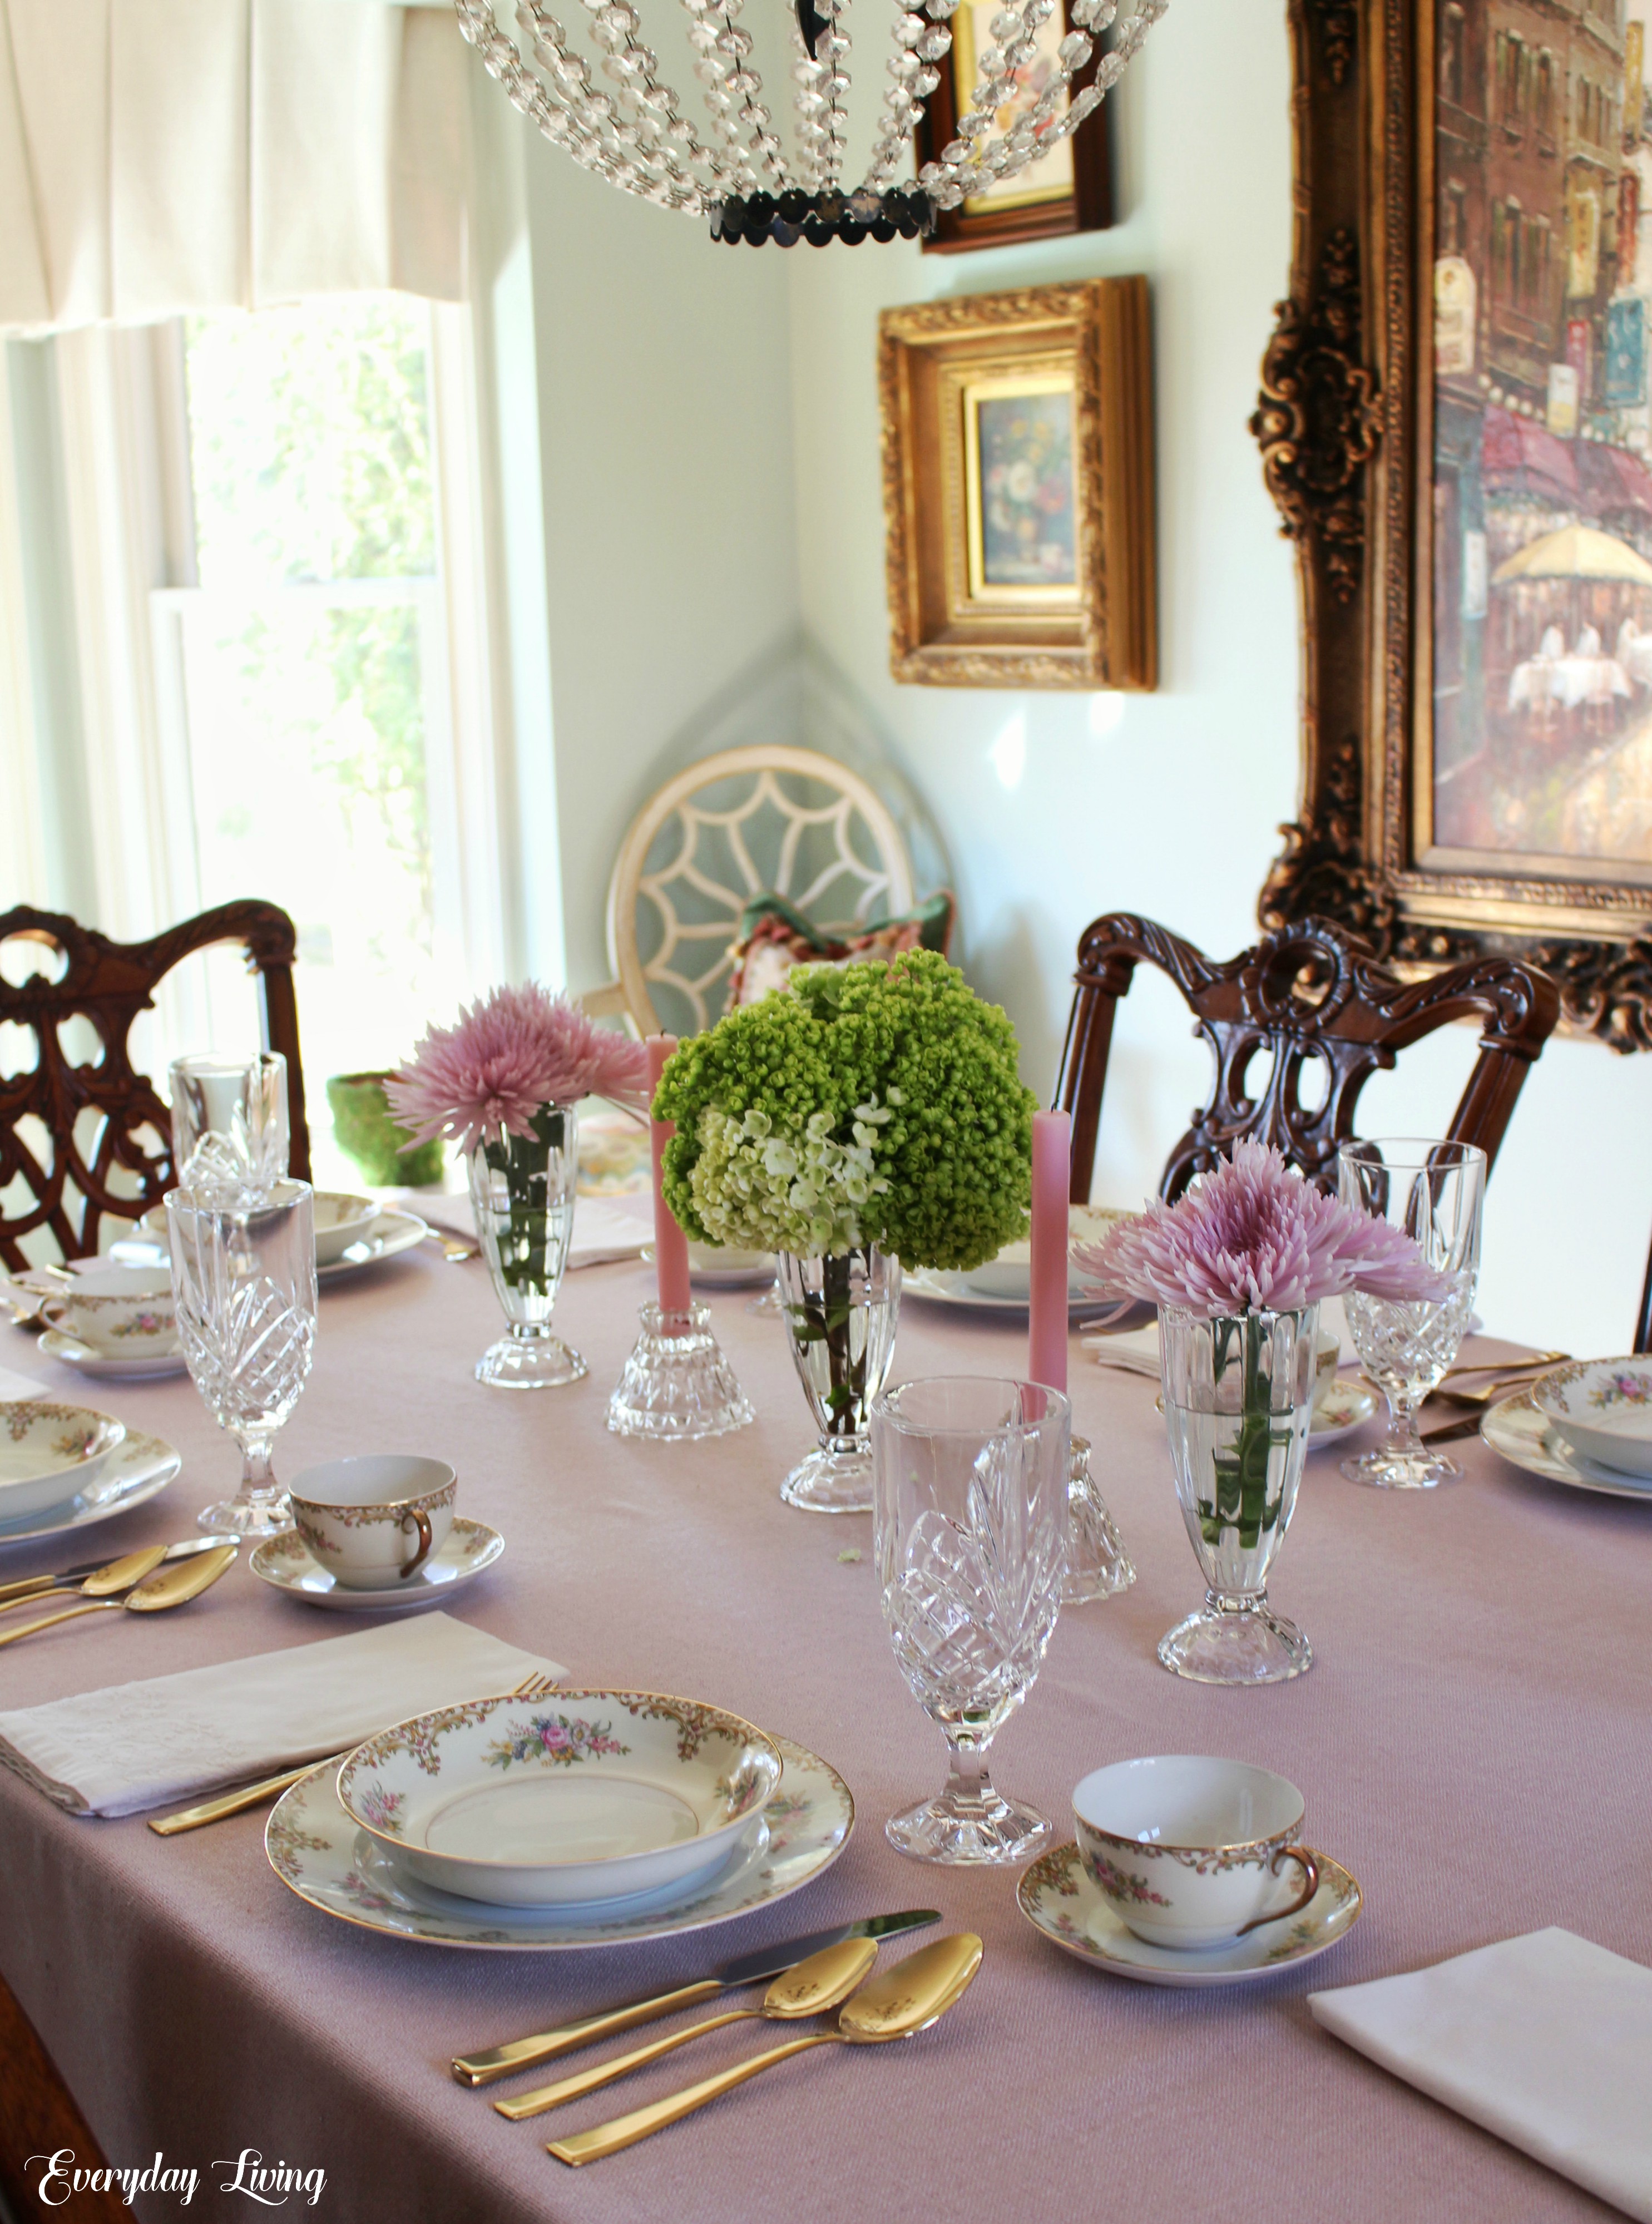 Tablescape Tuesday: The First Appearance